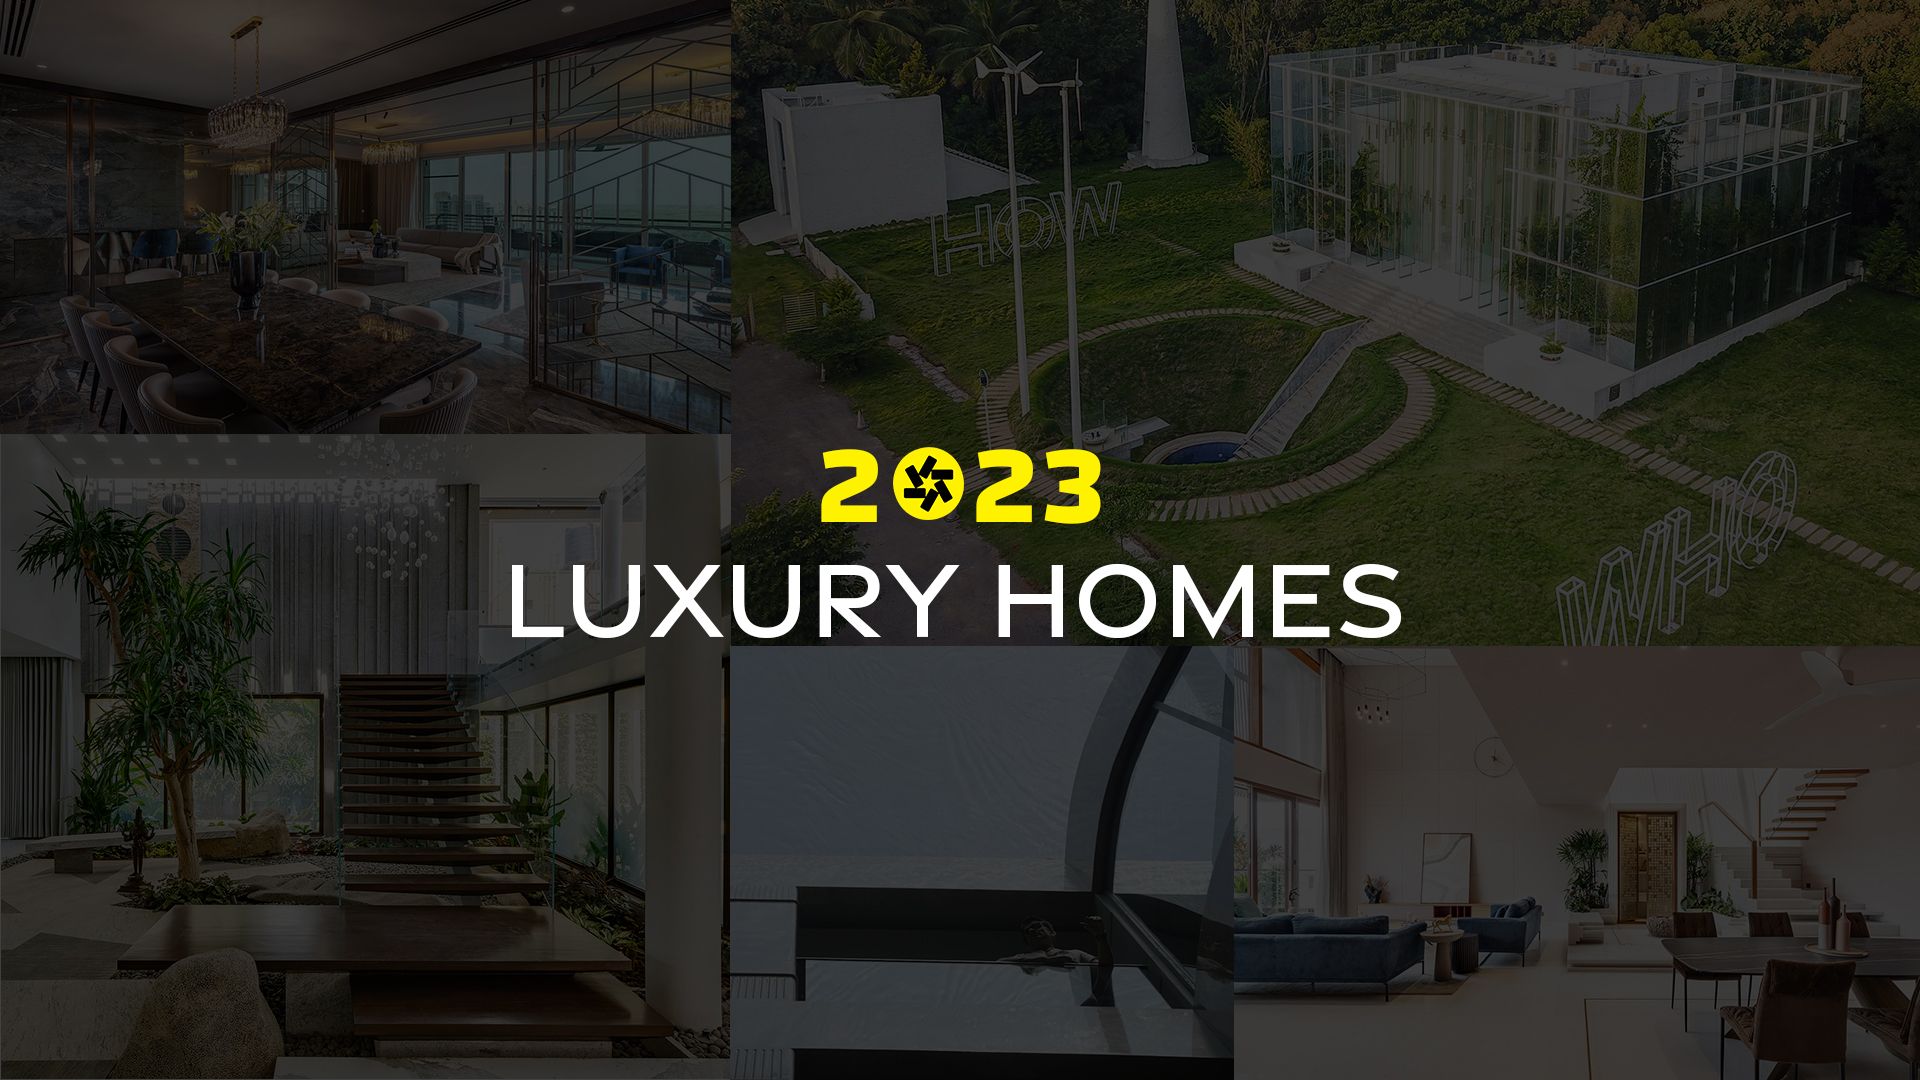 2023: 5 Luxe Homes to Experience a Taste of Extravagance